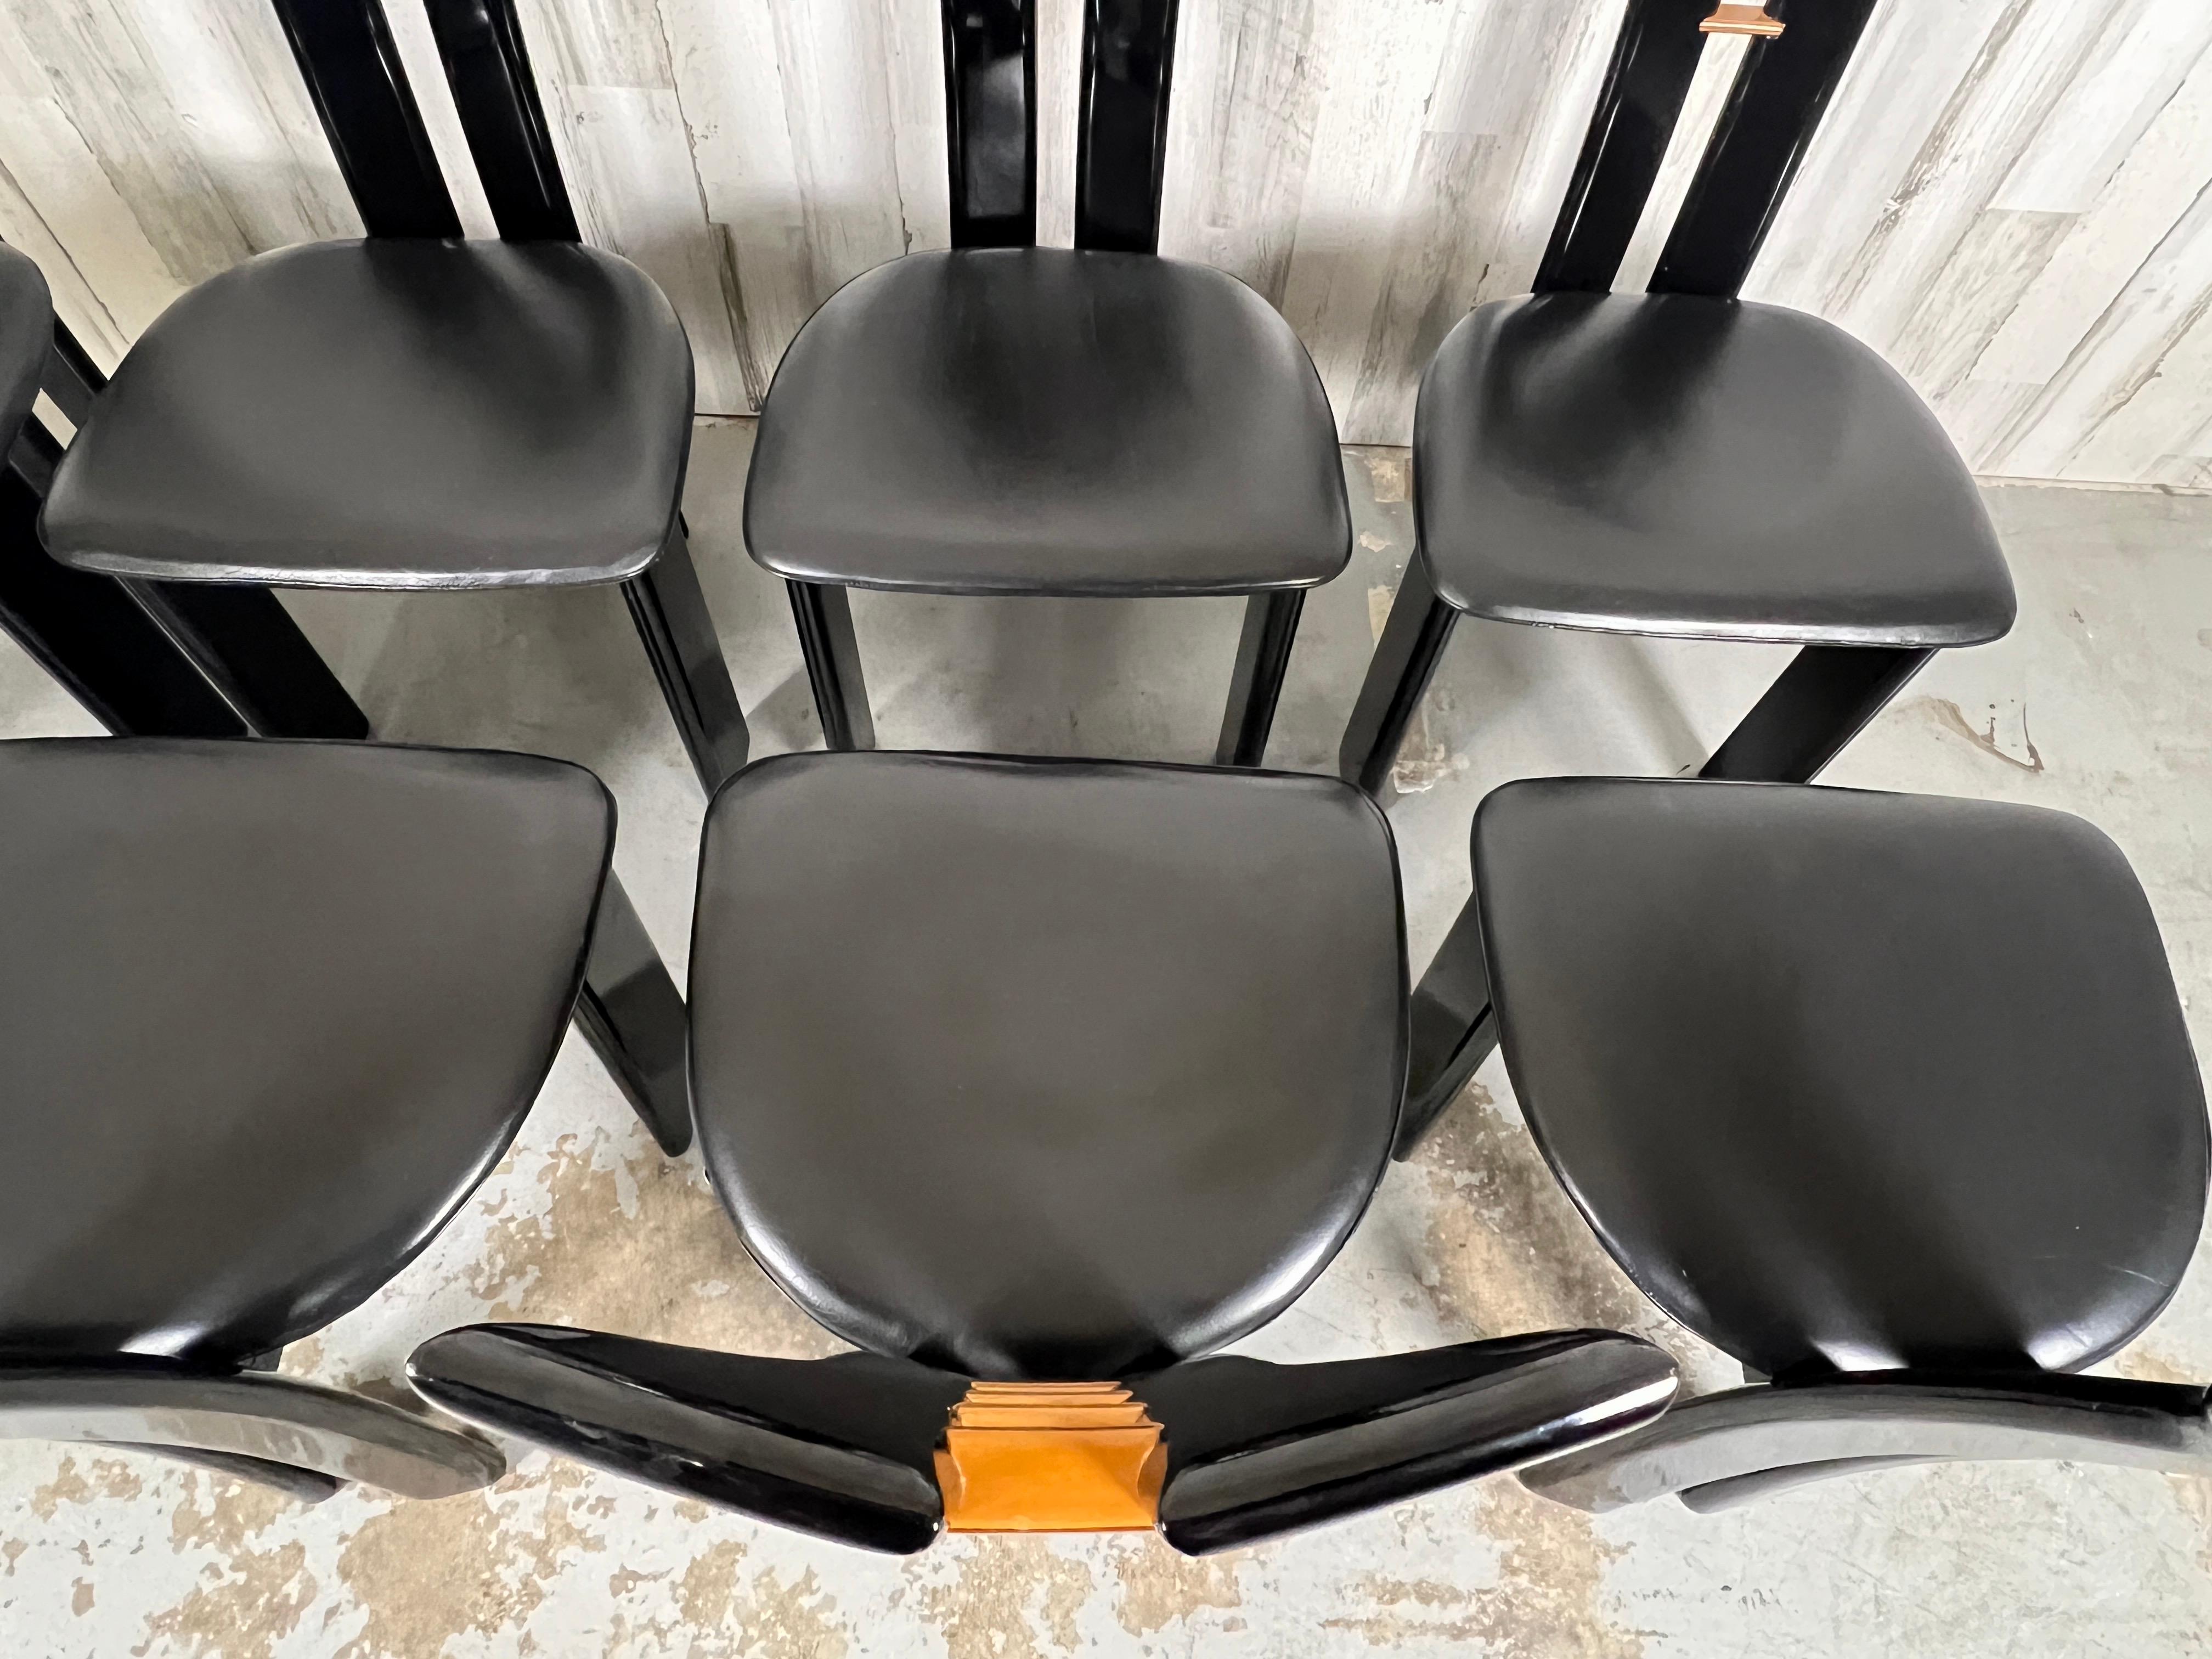 Pierre Cardin For Roche Bobois  Black Lacquer Dining Chairs 10